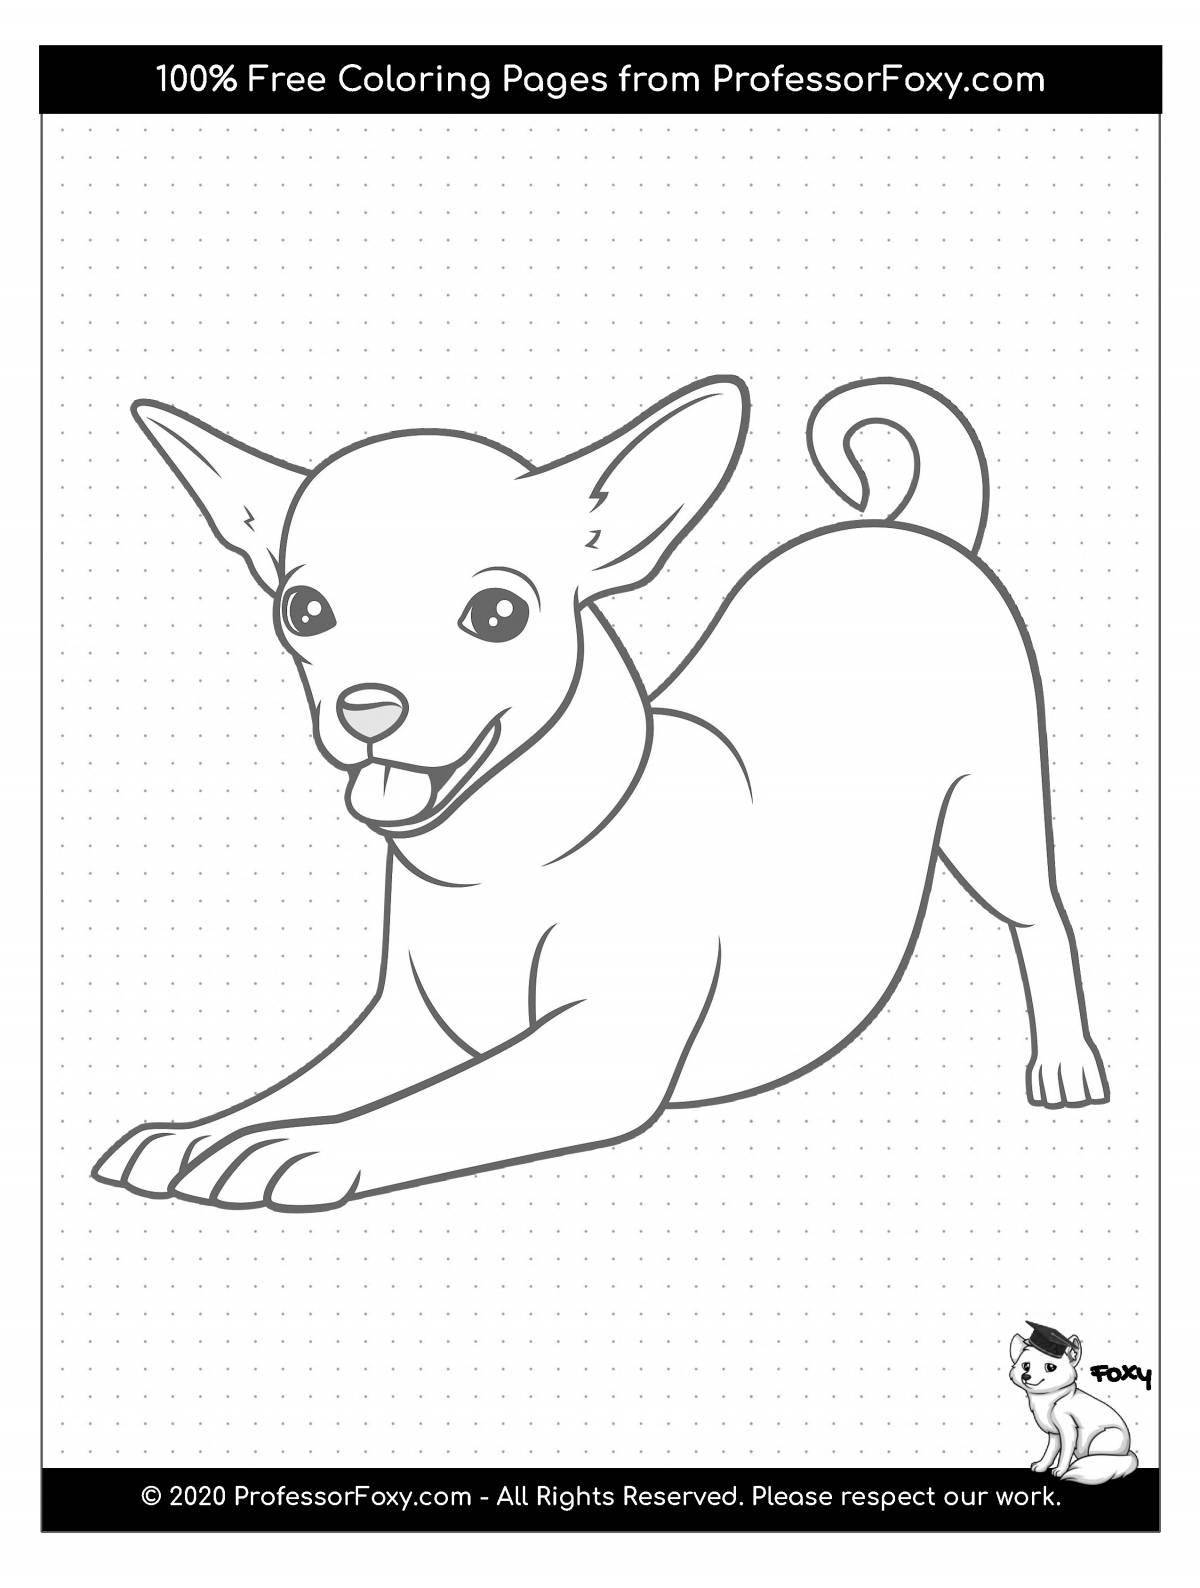 Children's adorable Chihuahua coloring book